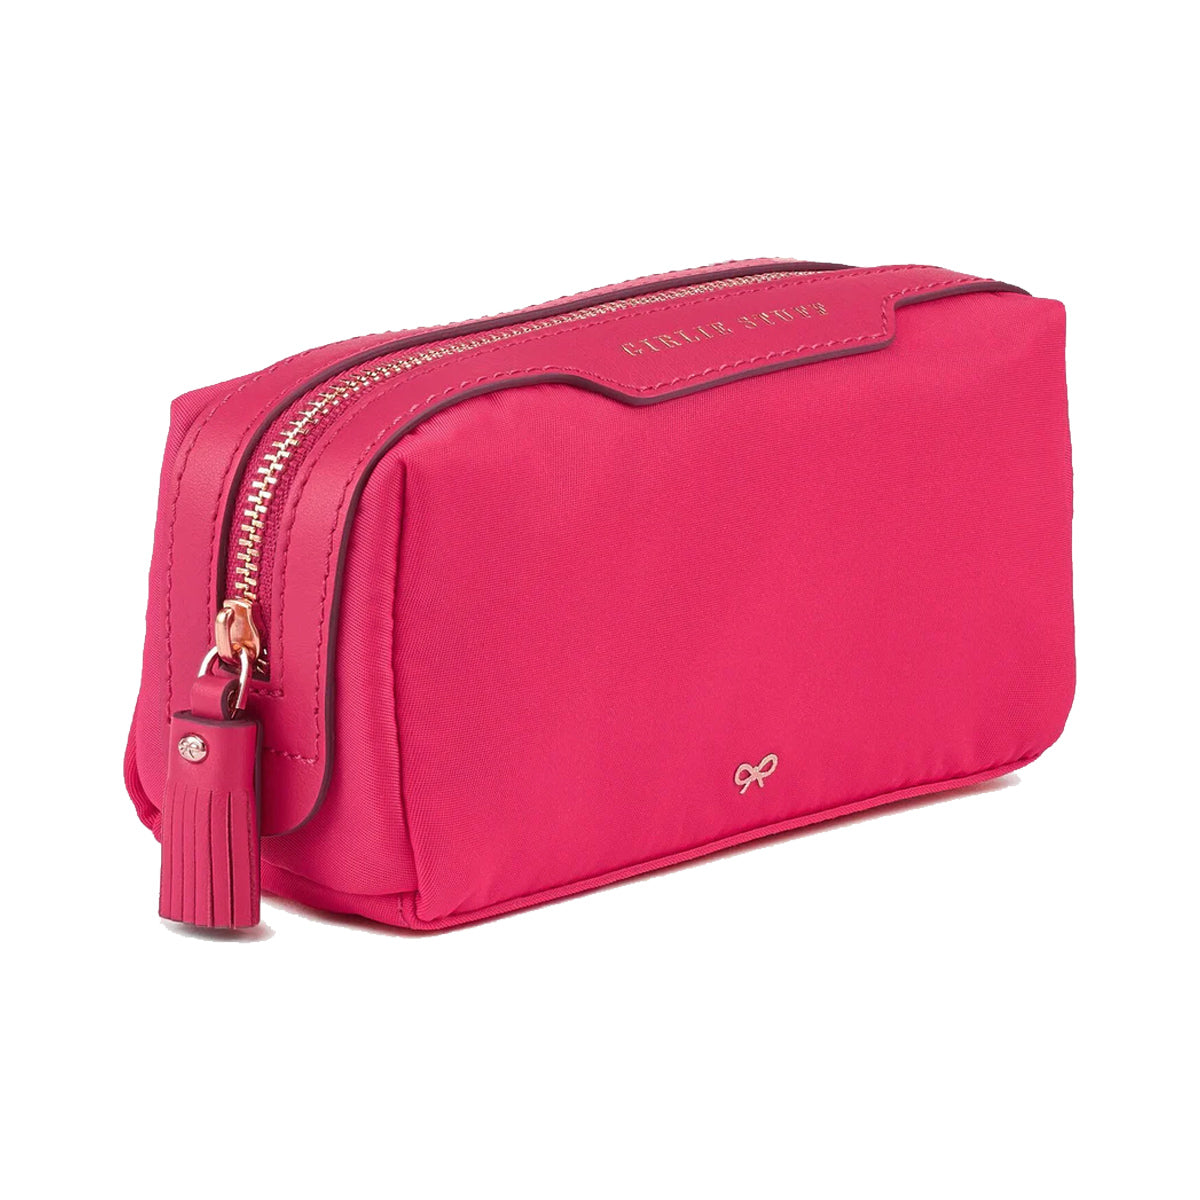 "Girlie Stuff" Pouch in Hot Pink Nylon - Anya Hindmarch